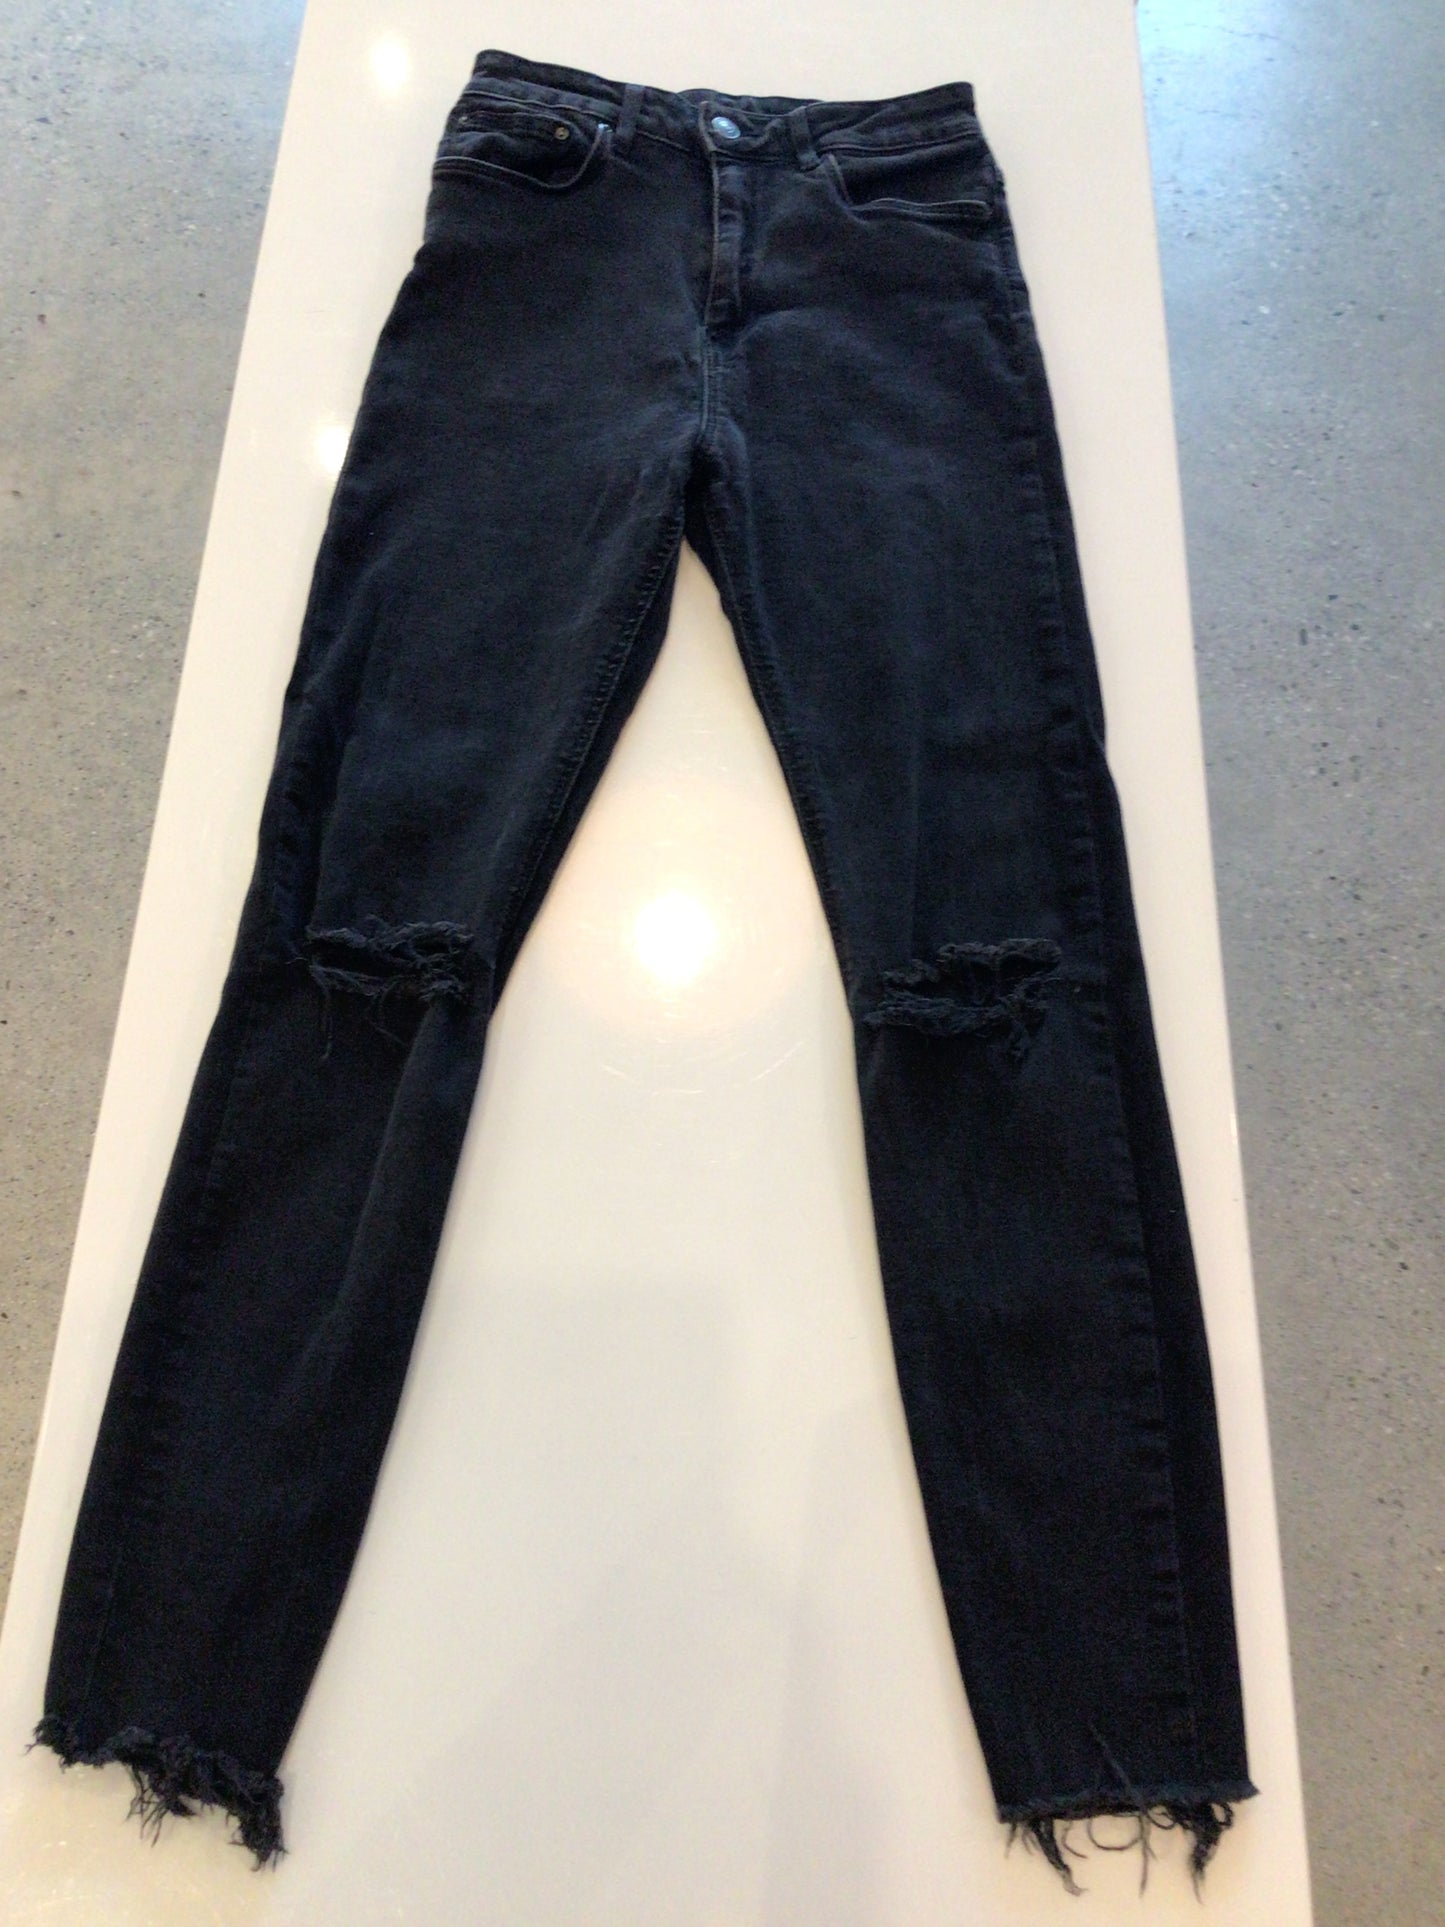 Consignment 4475-04 Zara Woman. High waisted black ripped knee jeans. Size 4.